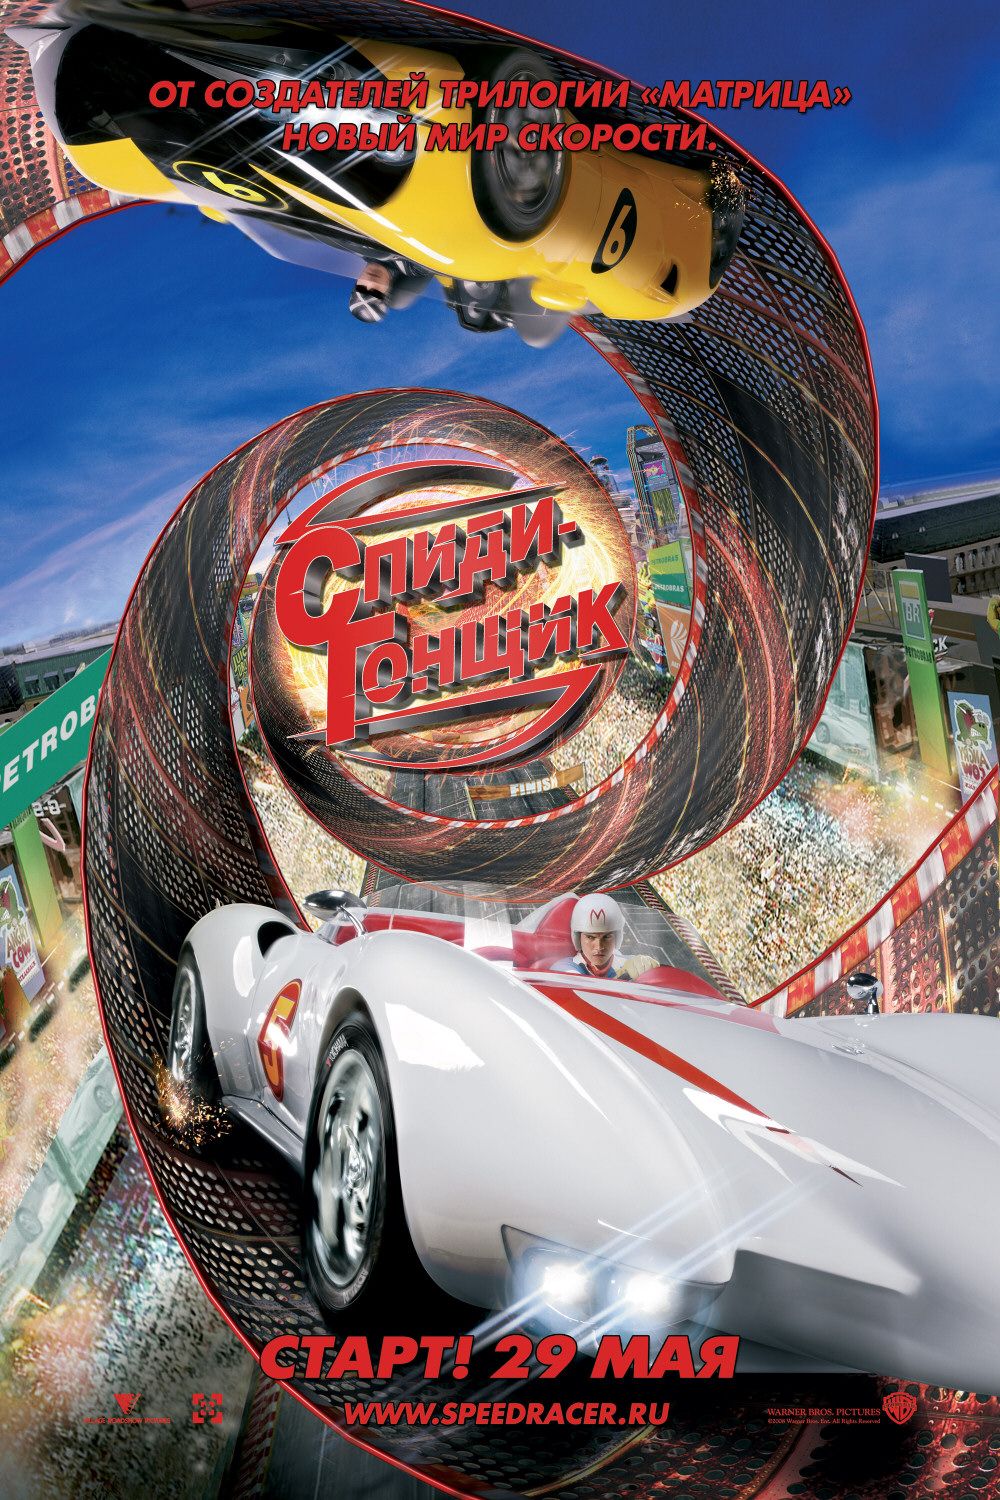 Extra Large Movie Poster Image for Speed Racer (#8 of 9)